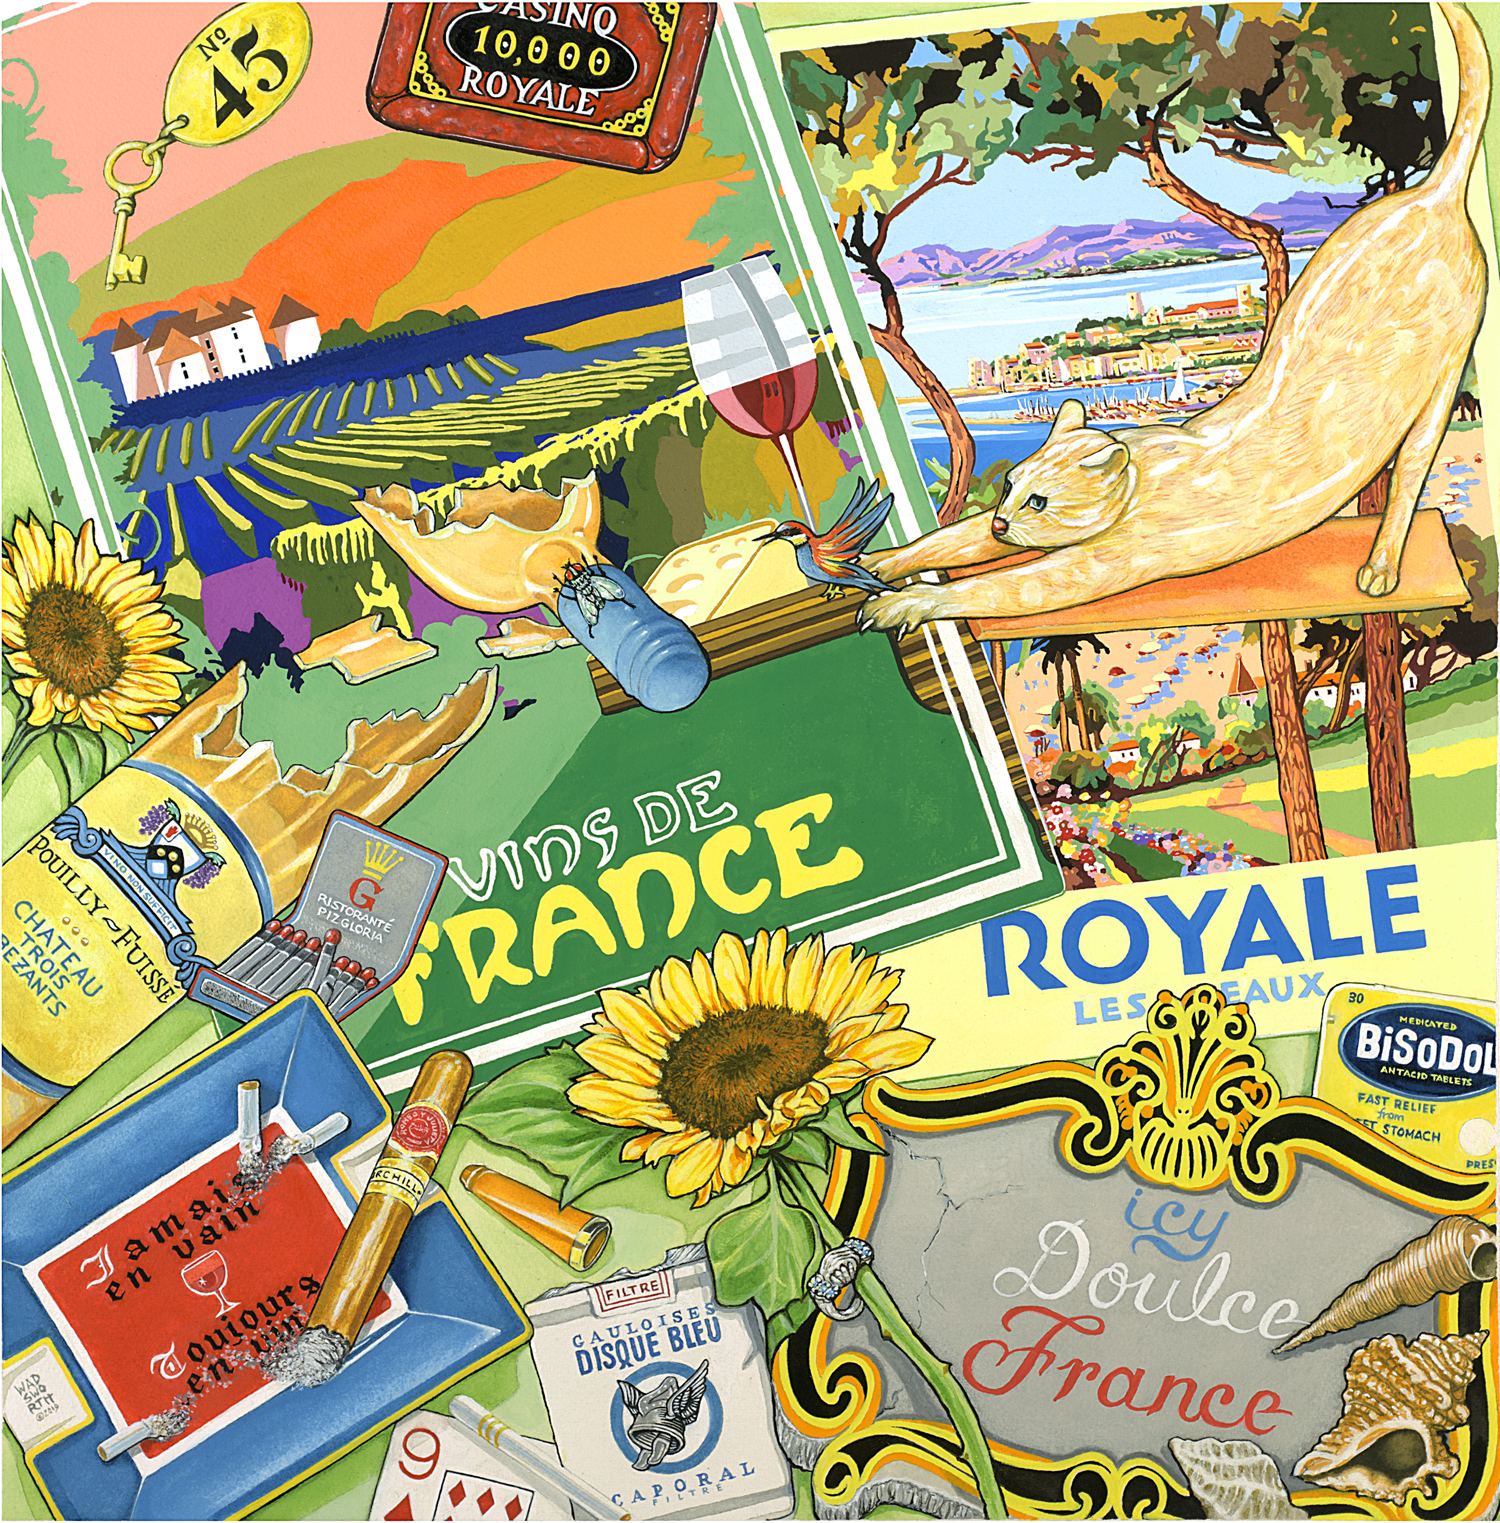 A layered collage of depictions of wine and cigar labels from France